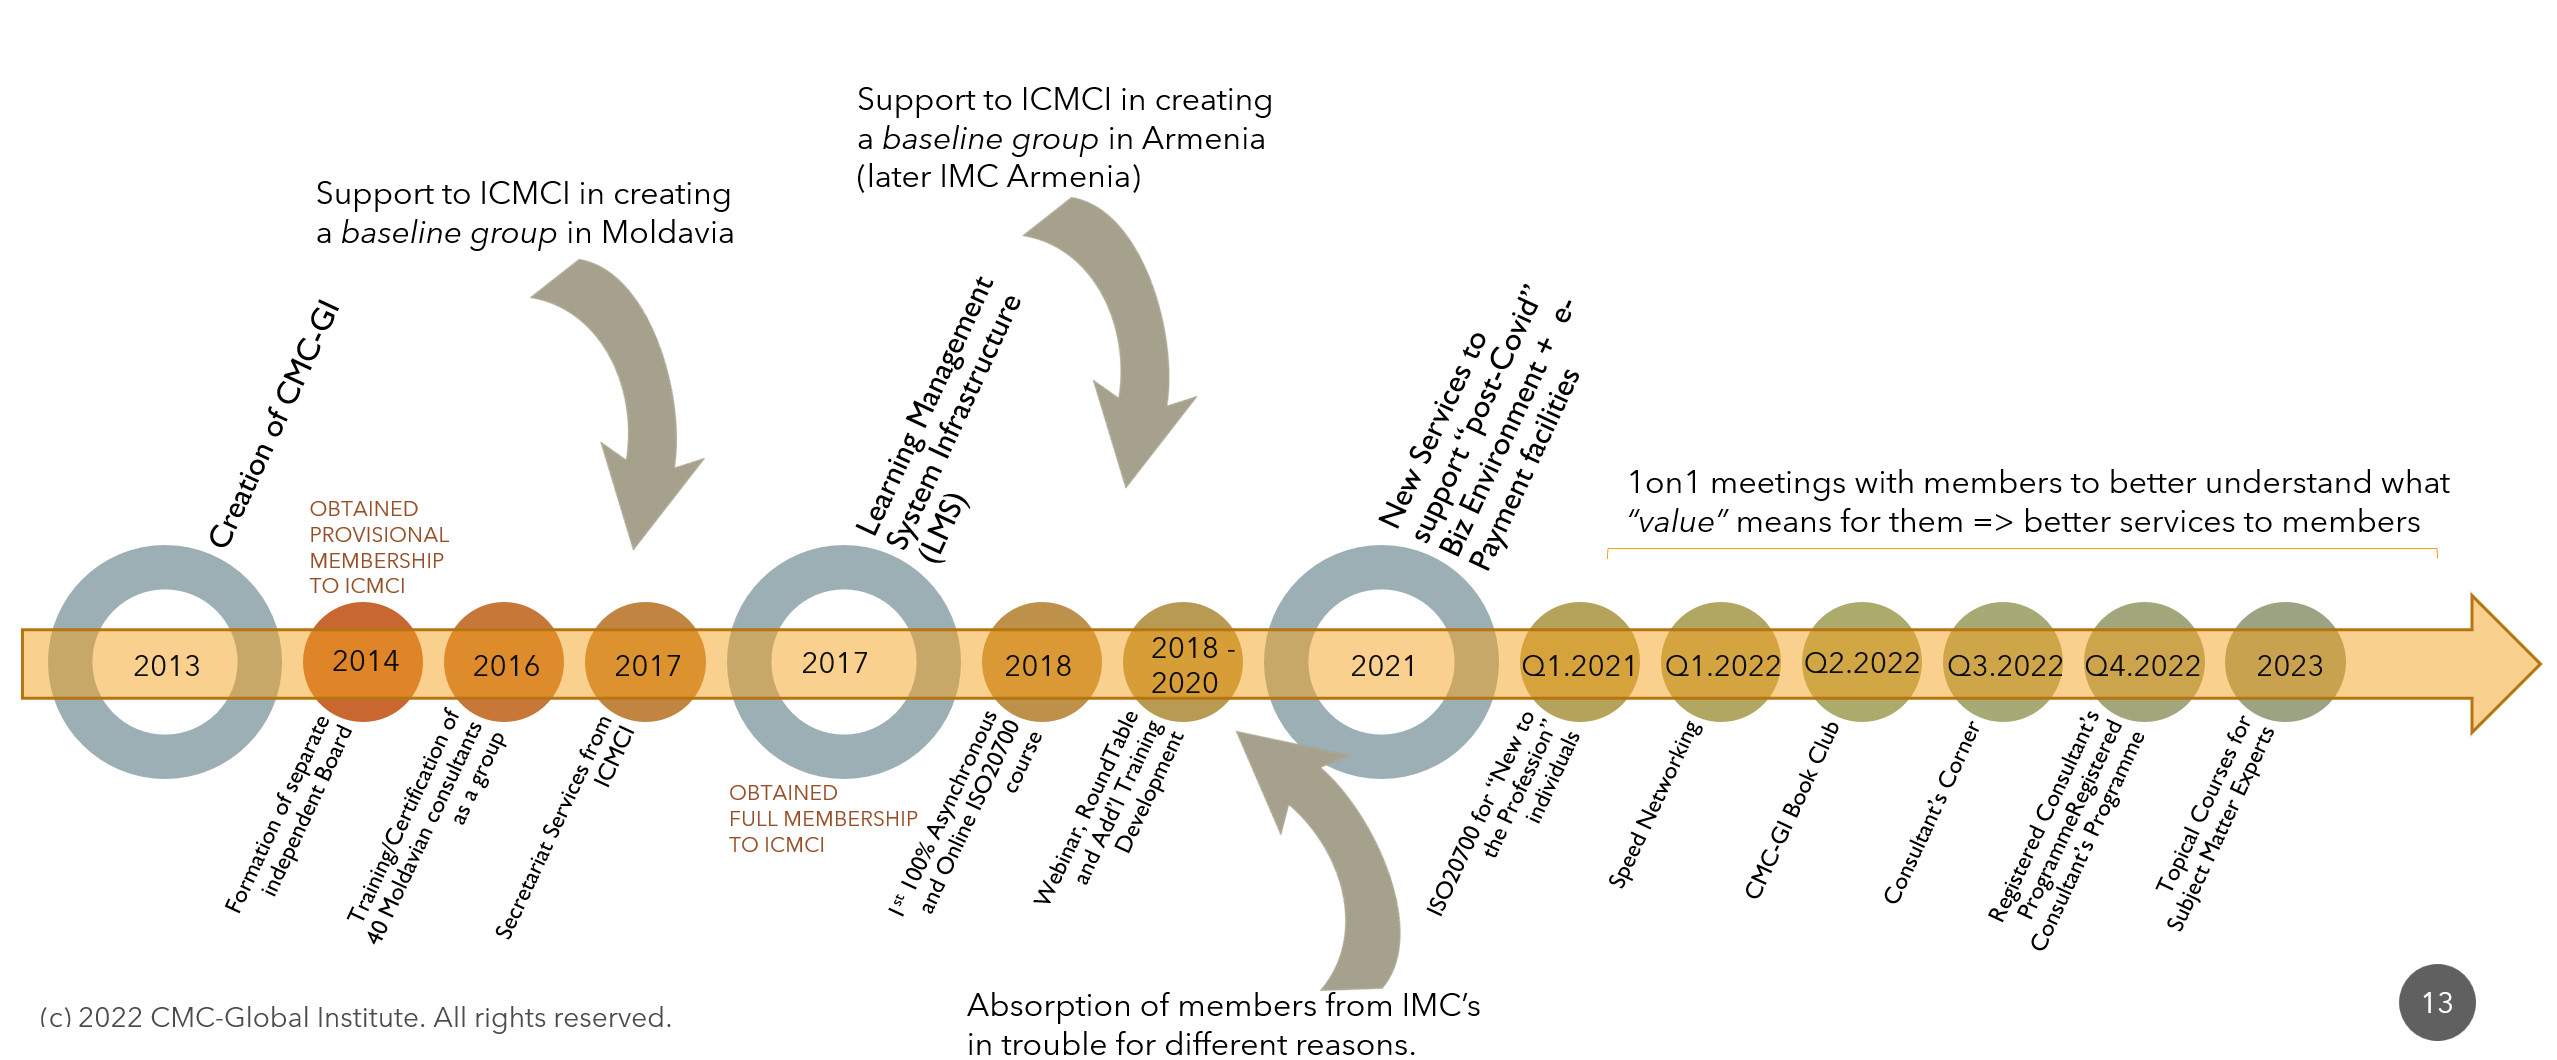 CMC-GI: Our Journey up to 2023